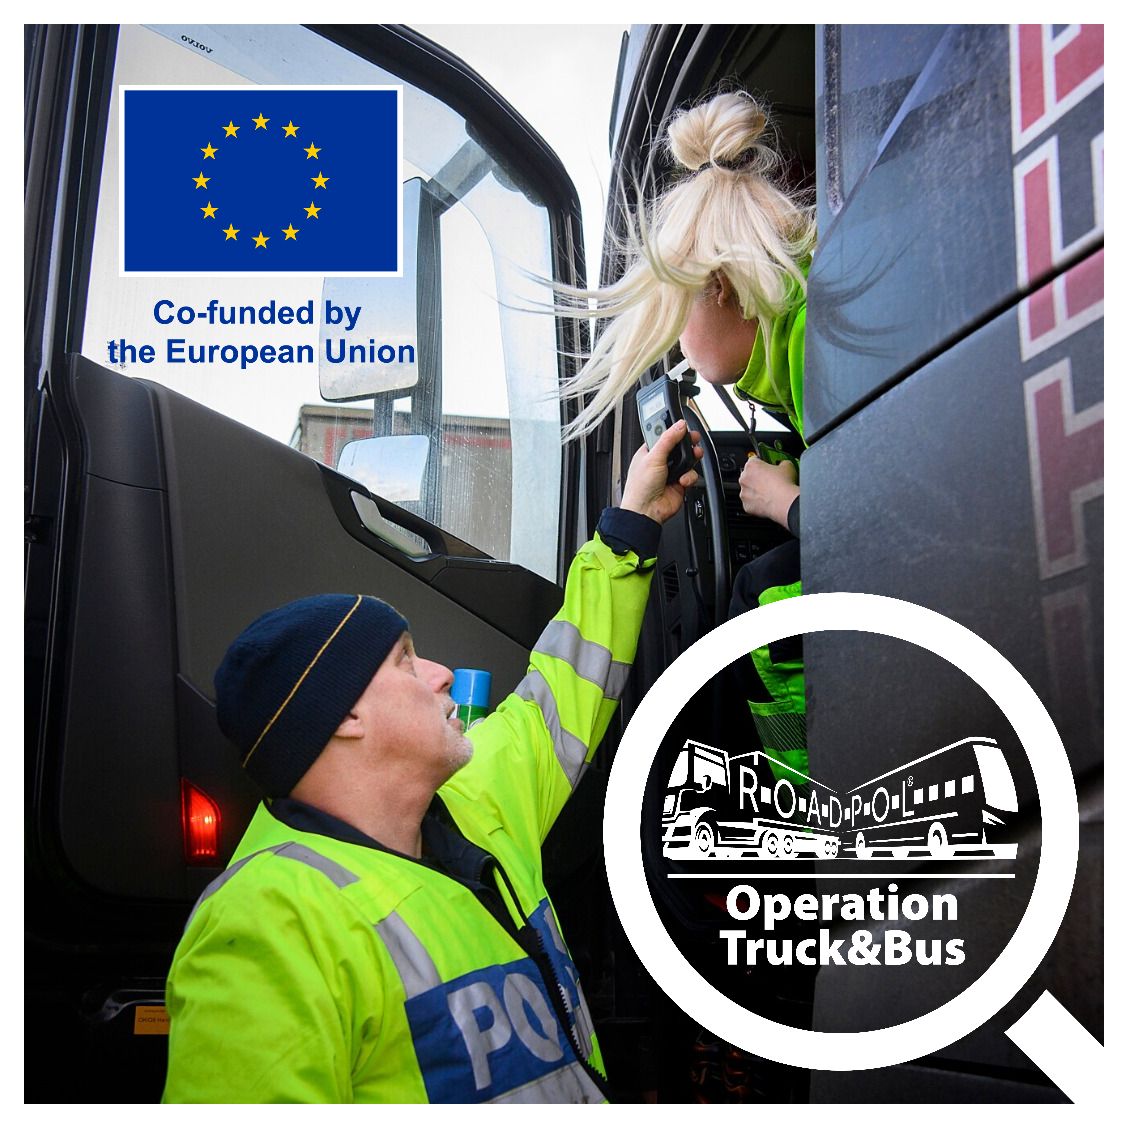 🚔 Though rare, alcohol/drugs offenses of truck/bus drivers are still an issue. Last October we caught 307 drunk, 106 drugged drivers 👮‍♀️ 👮‍♂️Intensified control of heavy goods and passenger commercial vehicles is the task of ROADPOL Truck&Bus Operation 13-19 May #roadsafety #police